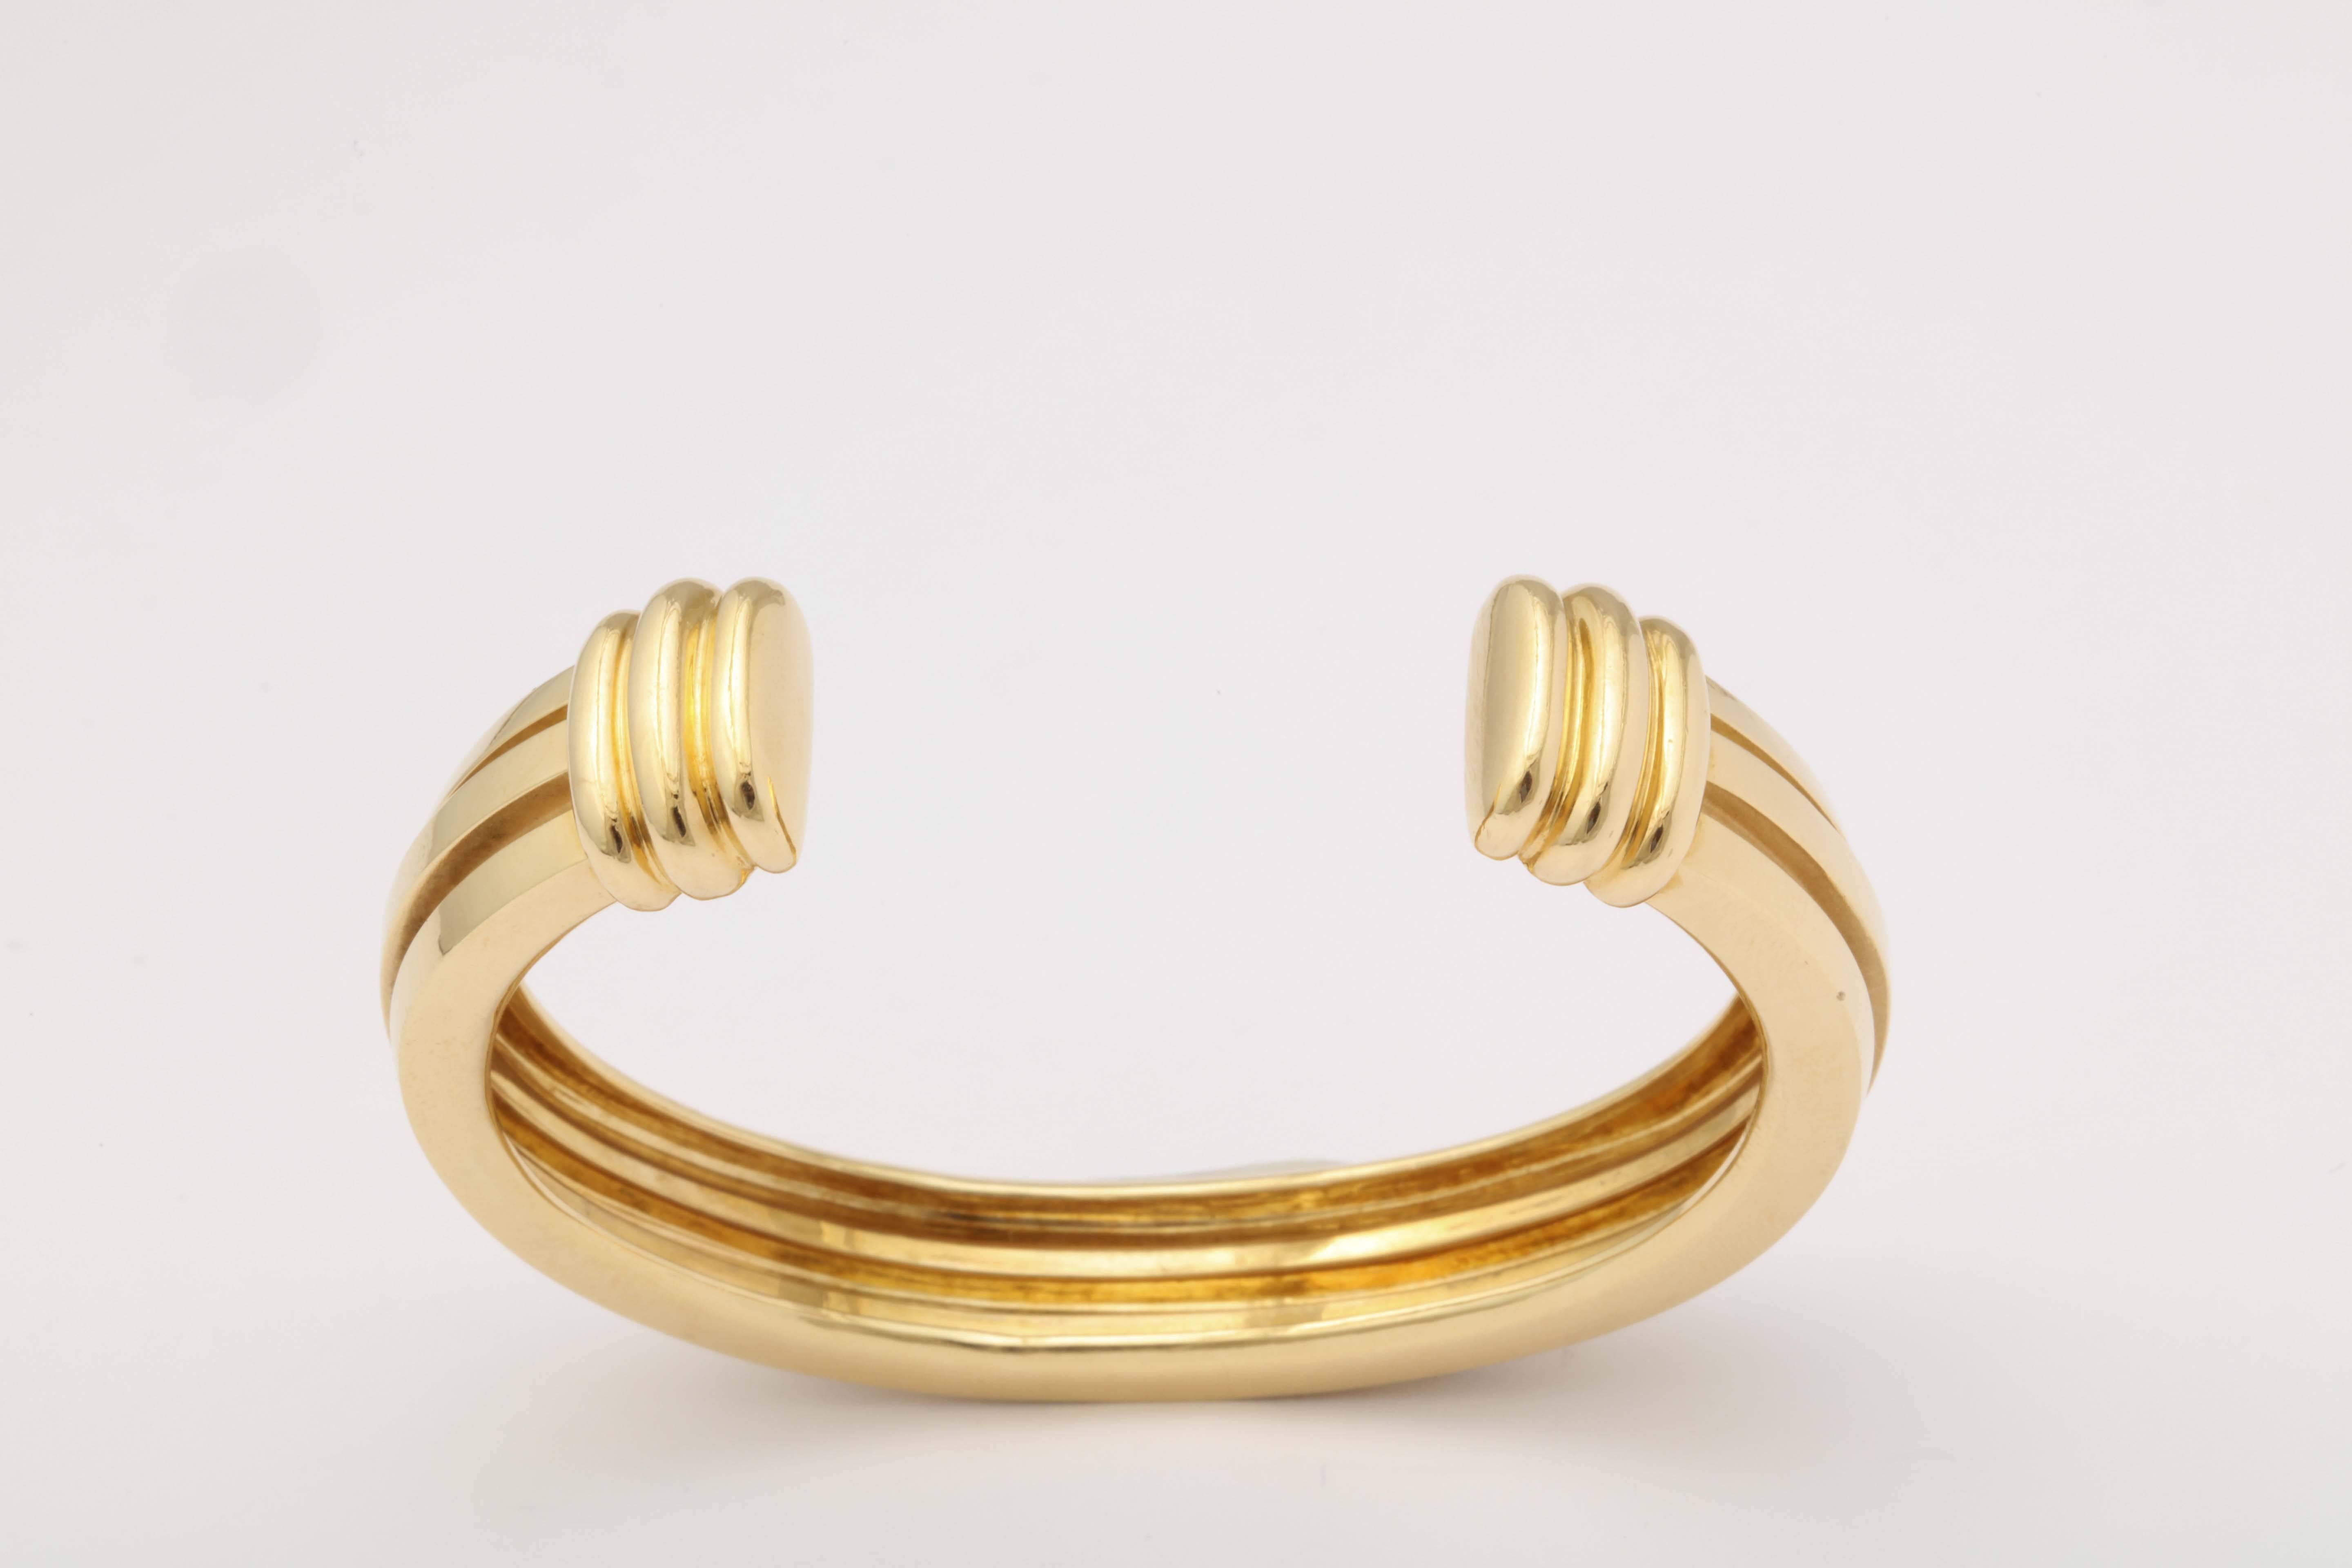 18kt Rigged Bangle Bracelet Which Is Made To Be Worn Reversible. Created By Tiffany & Co. The Atlas Collection.In the 1980's.